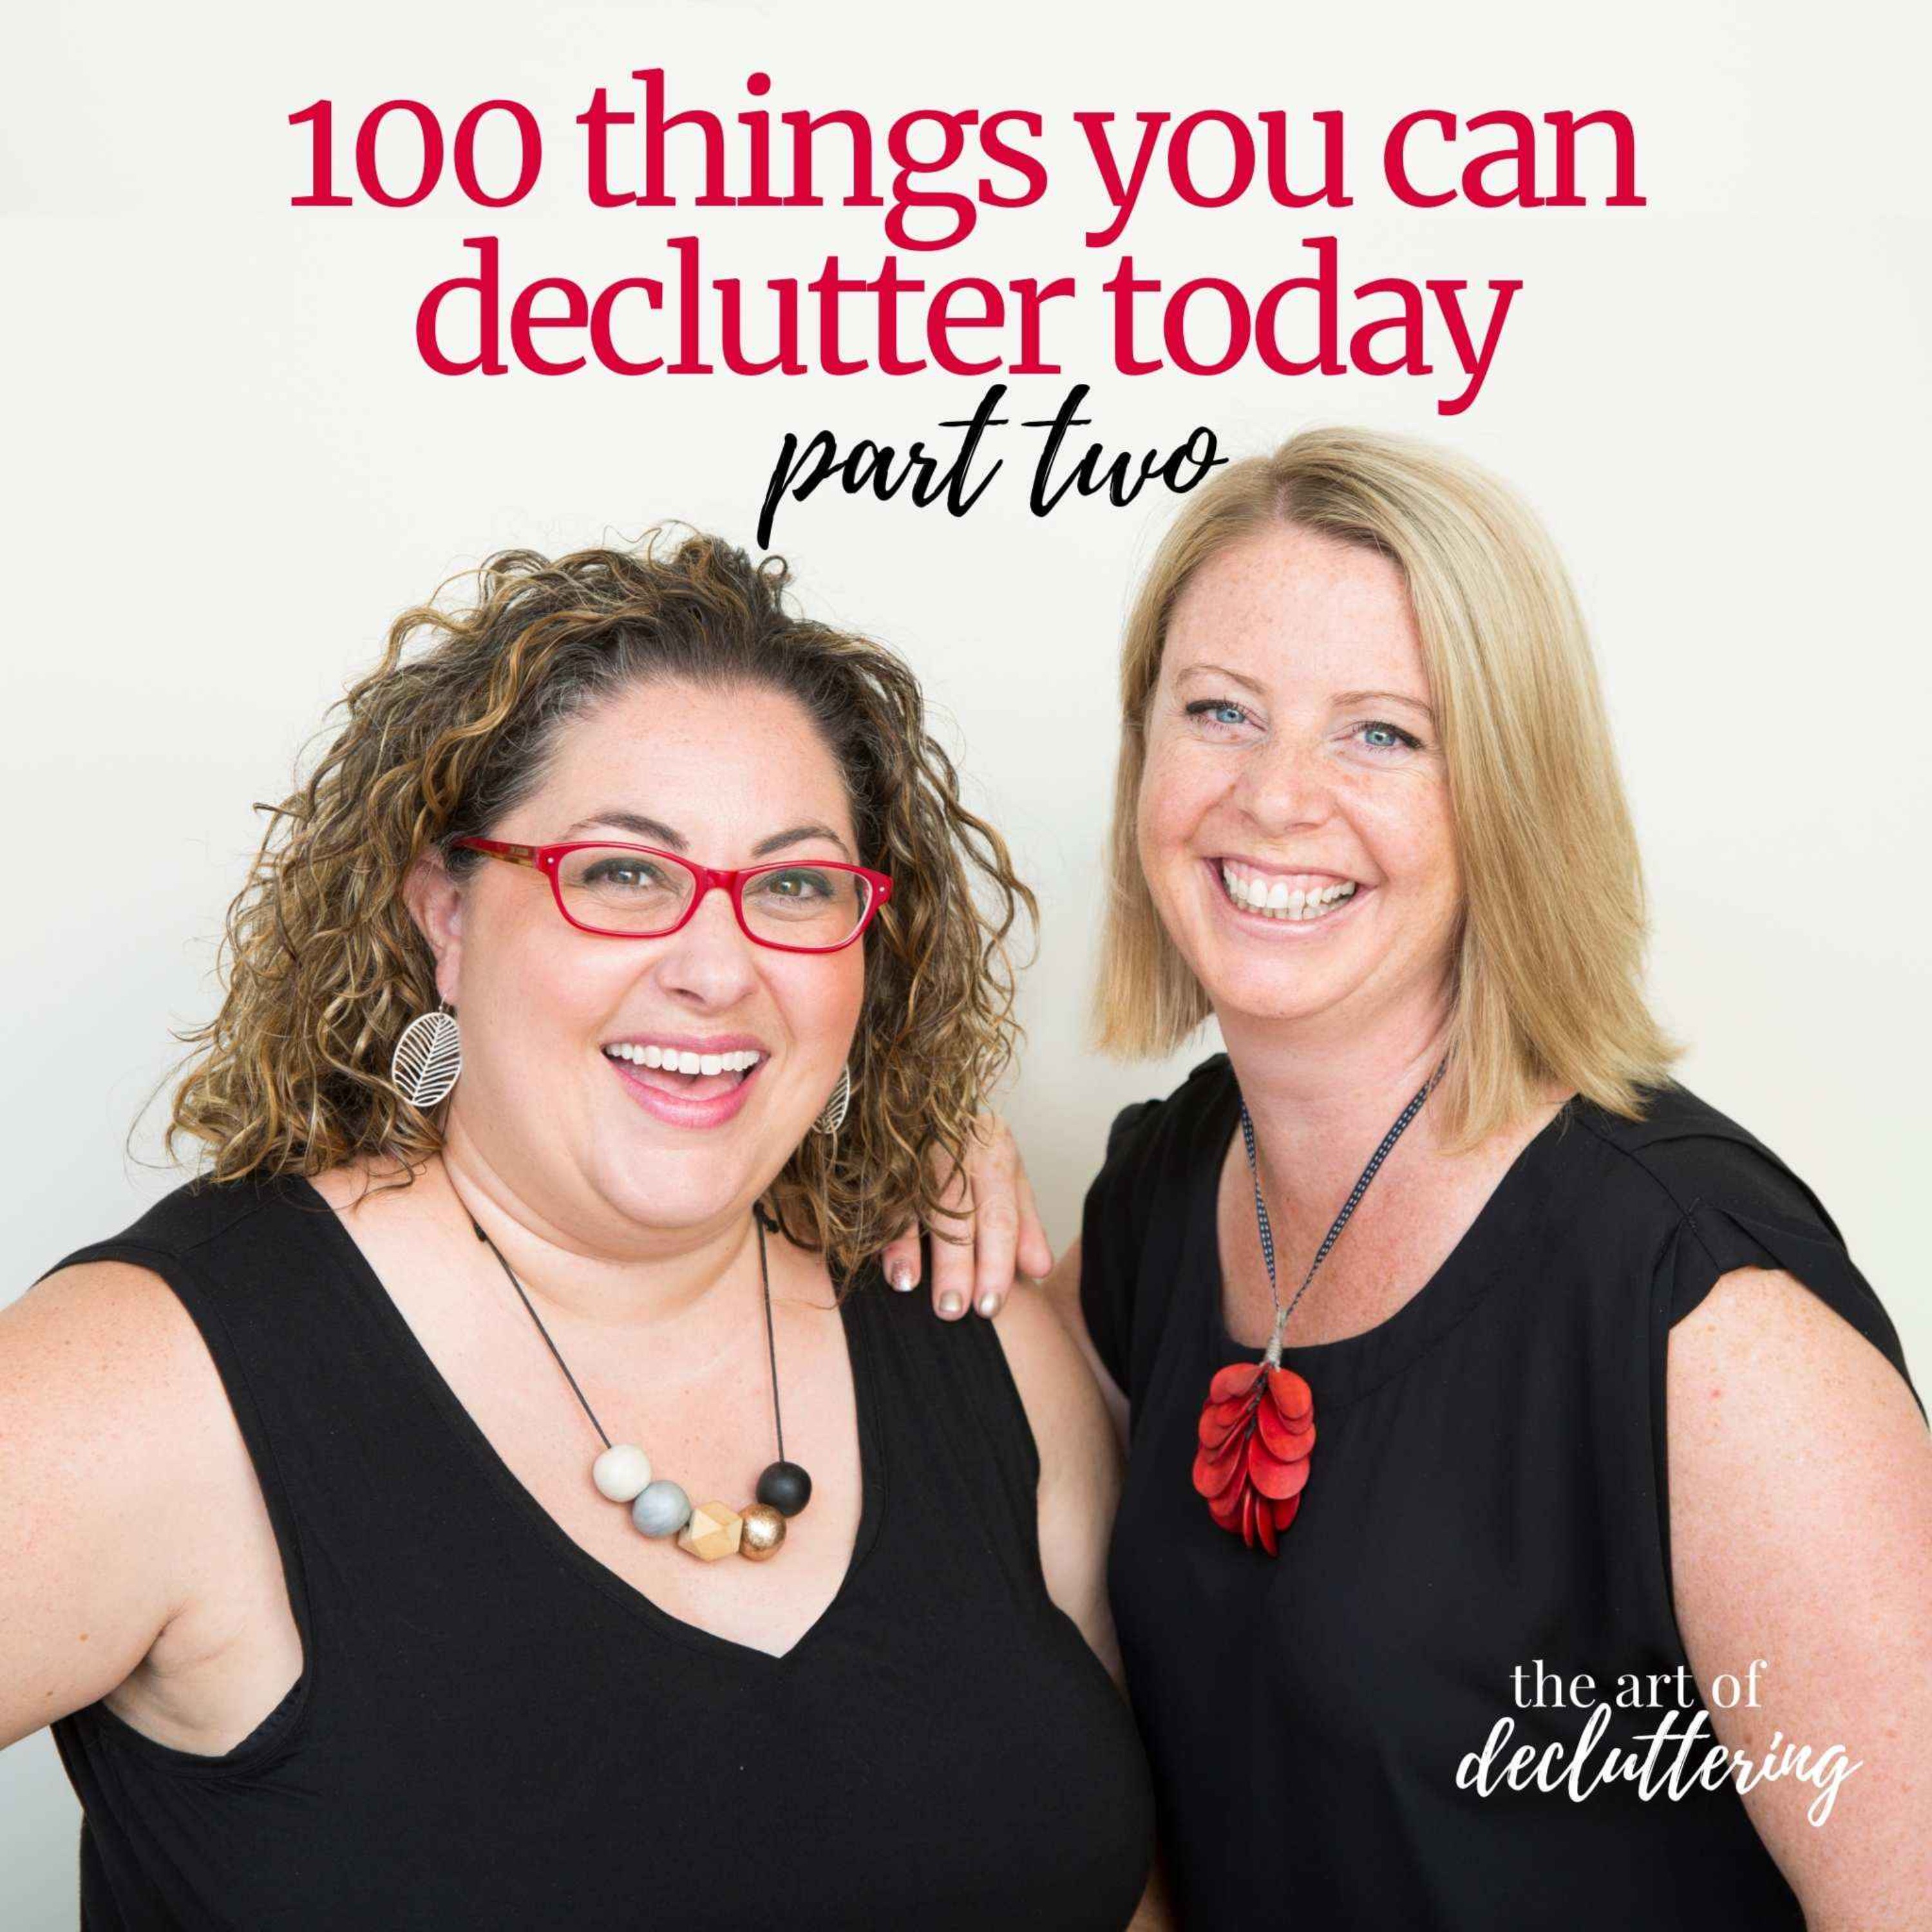 100 things you can declutter today - Part 2